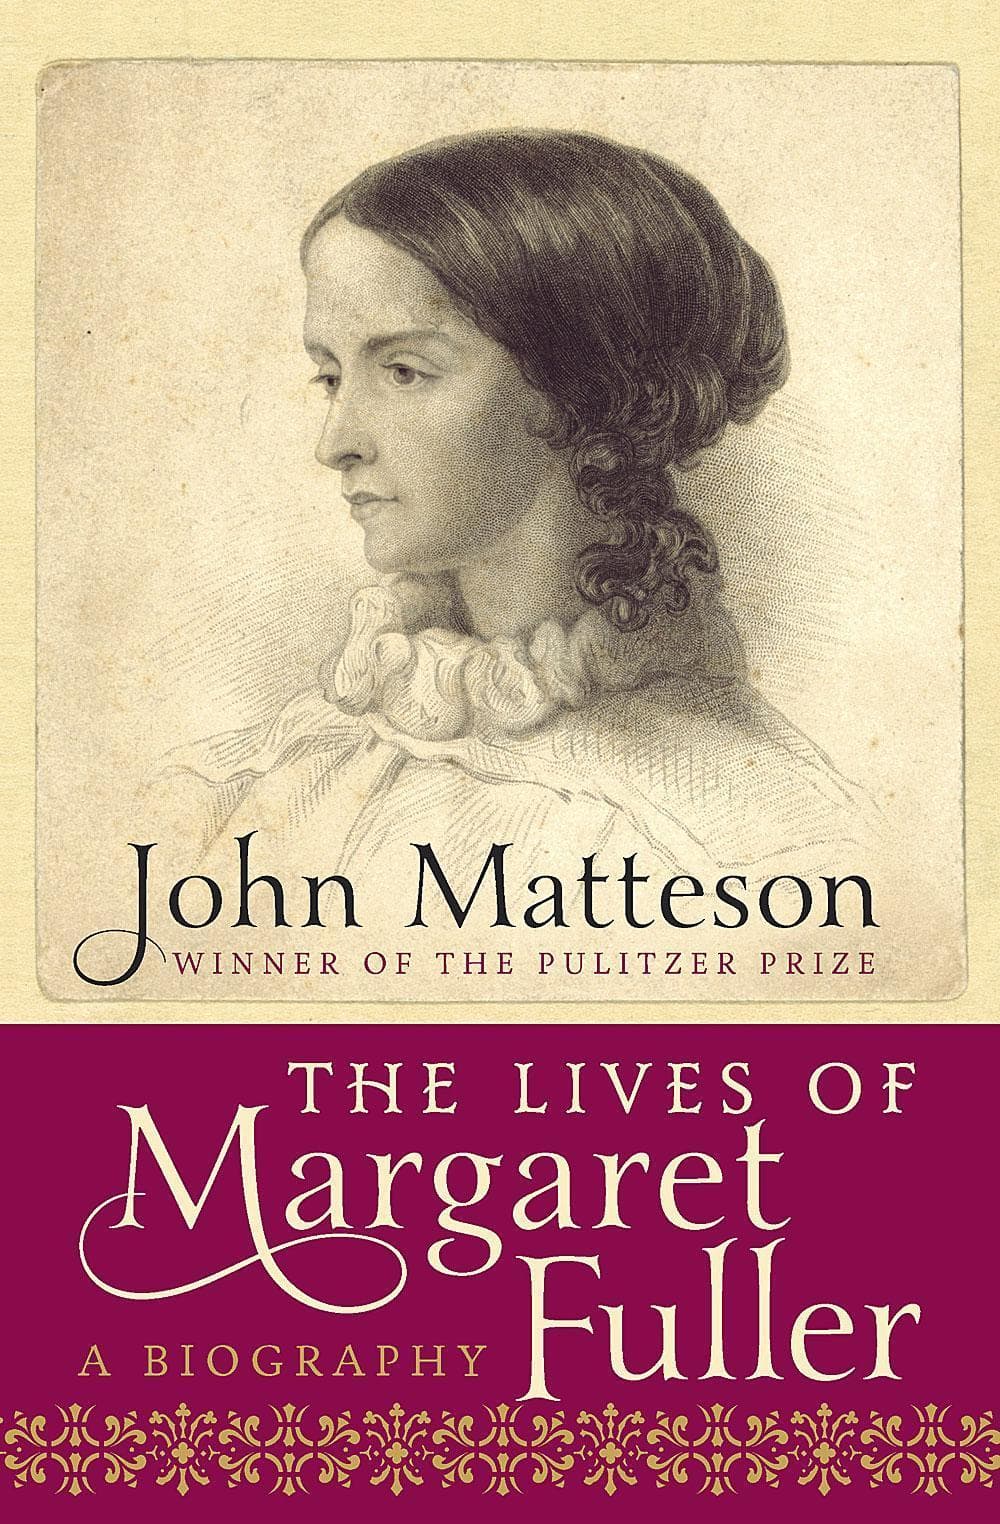 &quot;The Lives of Margaret Fuller&quot; by John Matteson. (Courtesy of W. W. Norton &amp; Company)